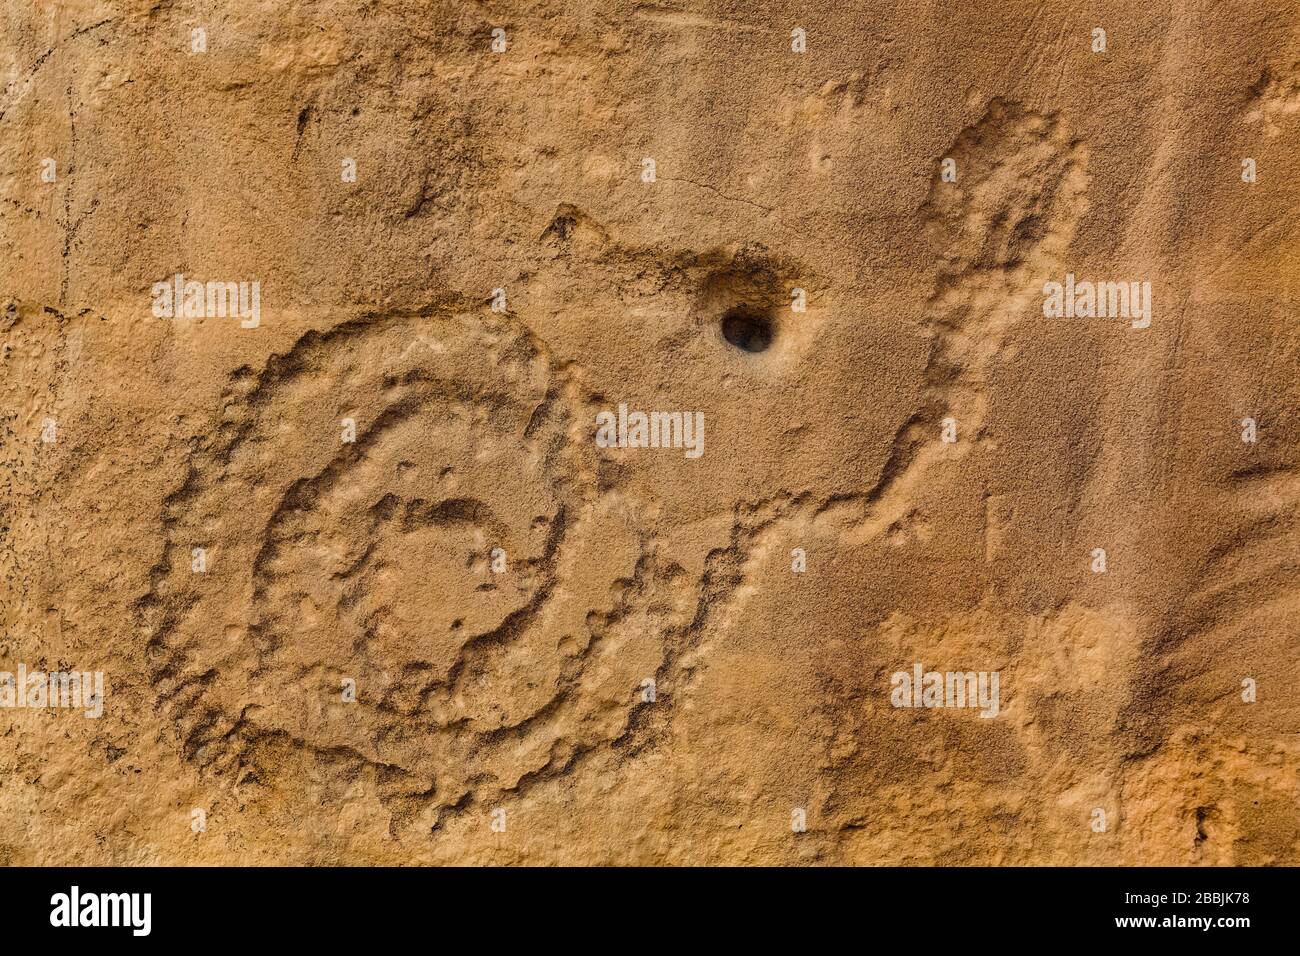 Spiral, snake-like petroglyph carved by ancestral Pueblo peoples along the Petroglyph Trail in Chaco Culture National Historical Park, New Mexico, USA Stock Photo